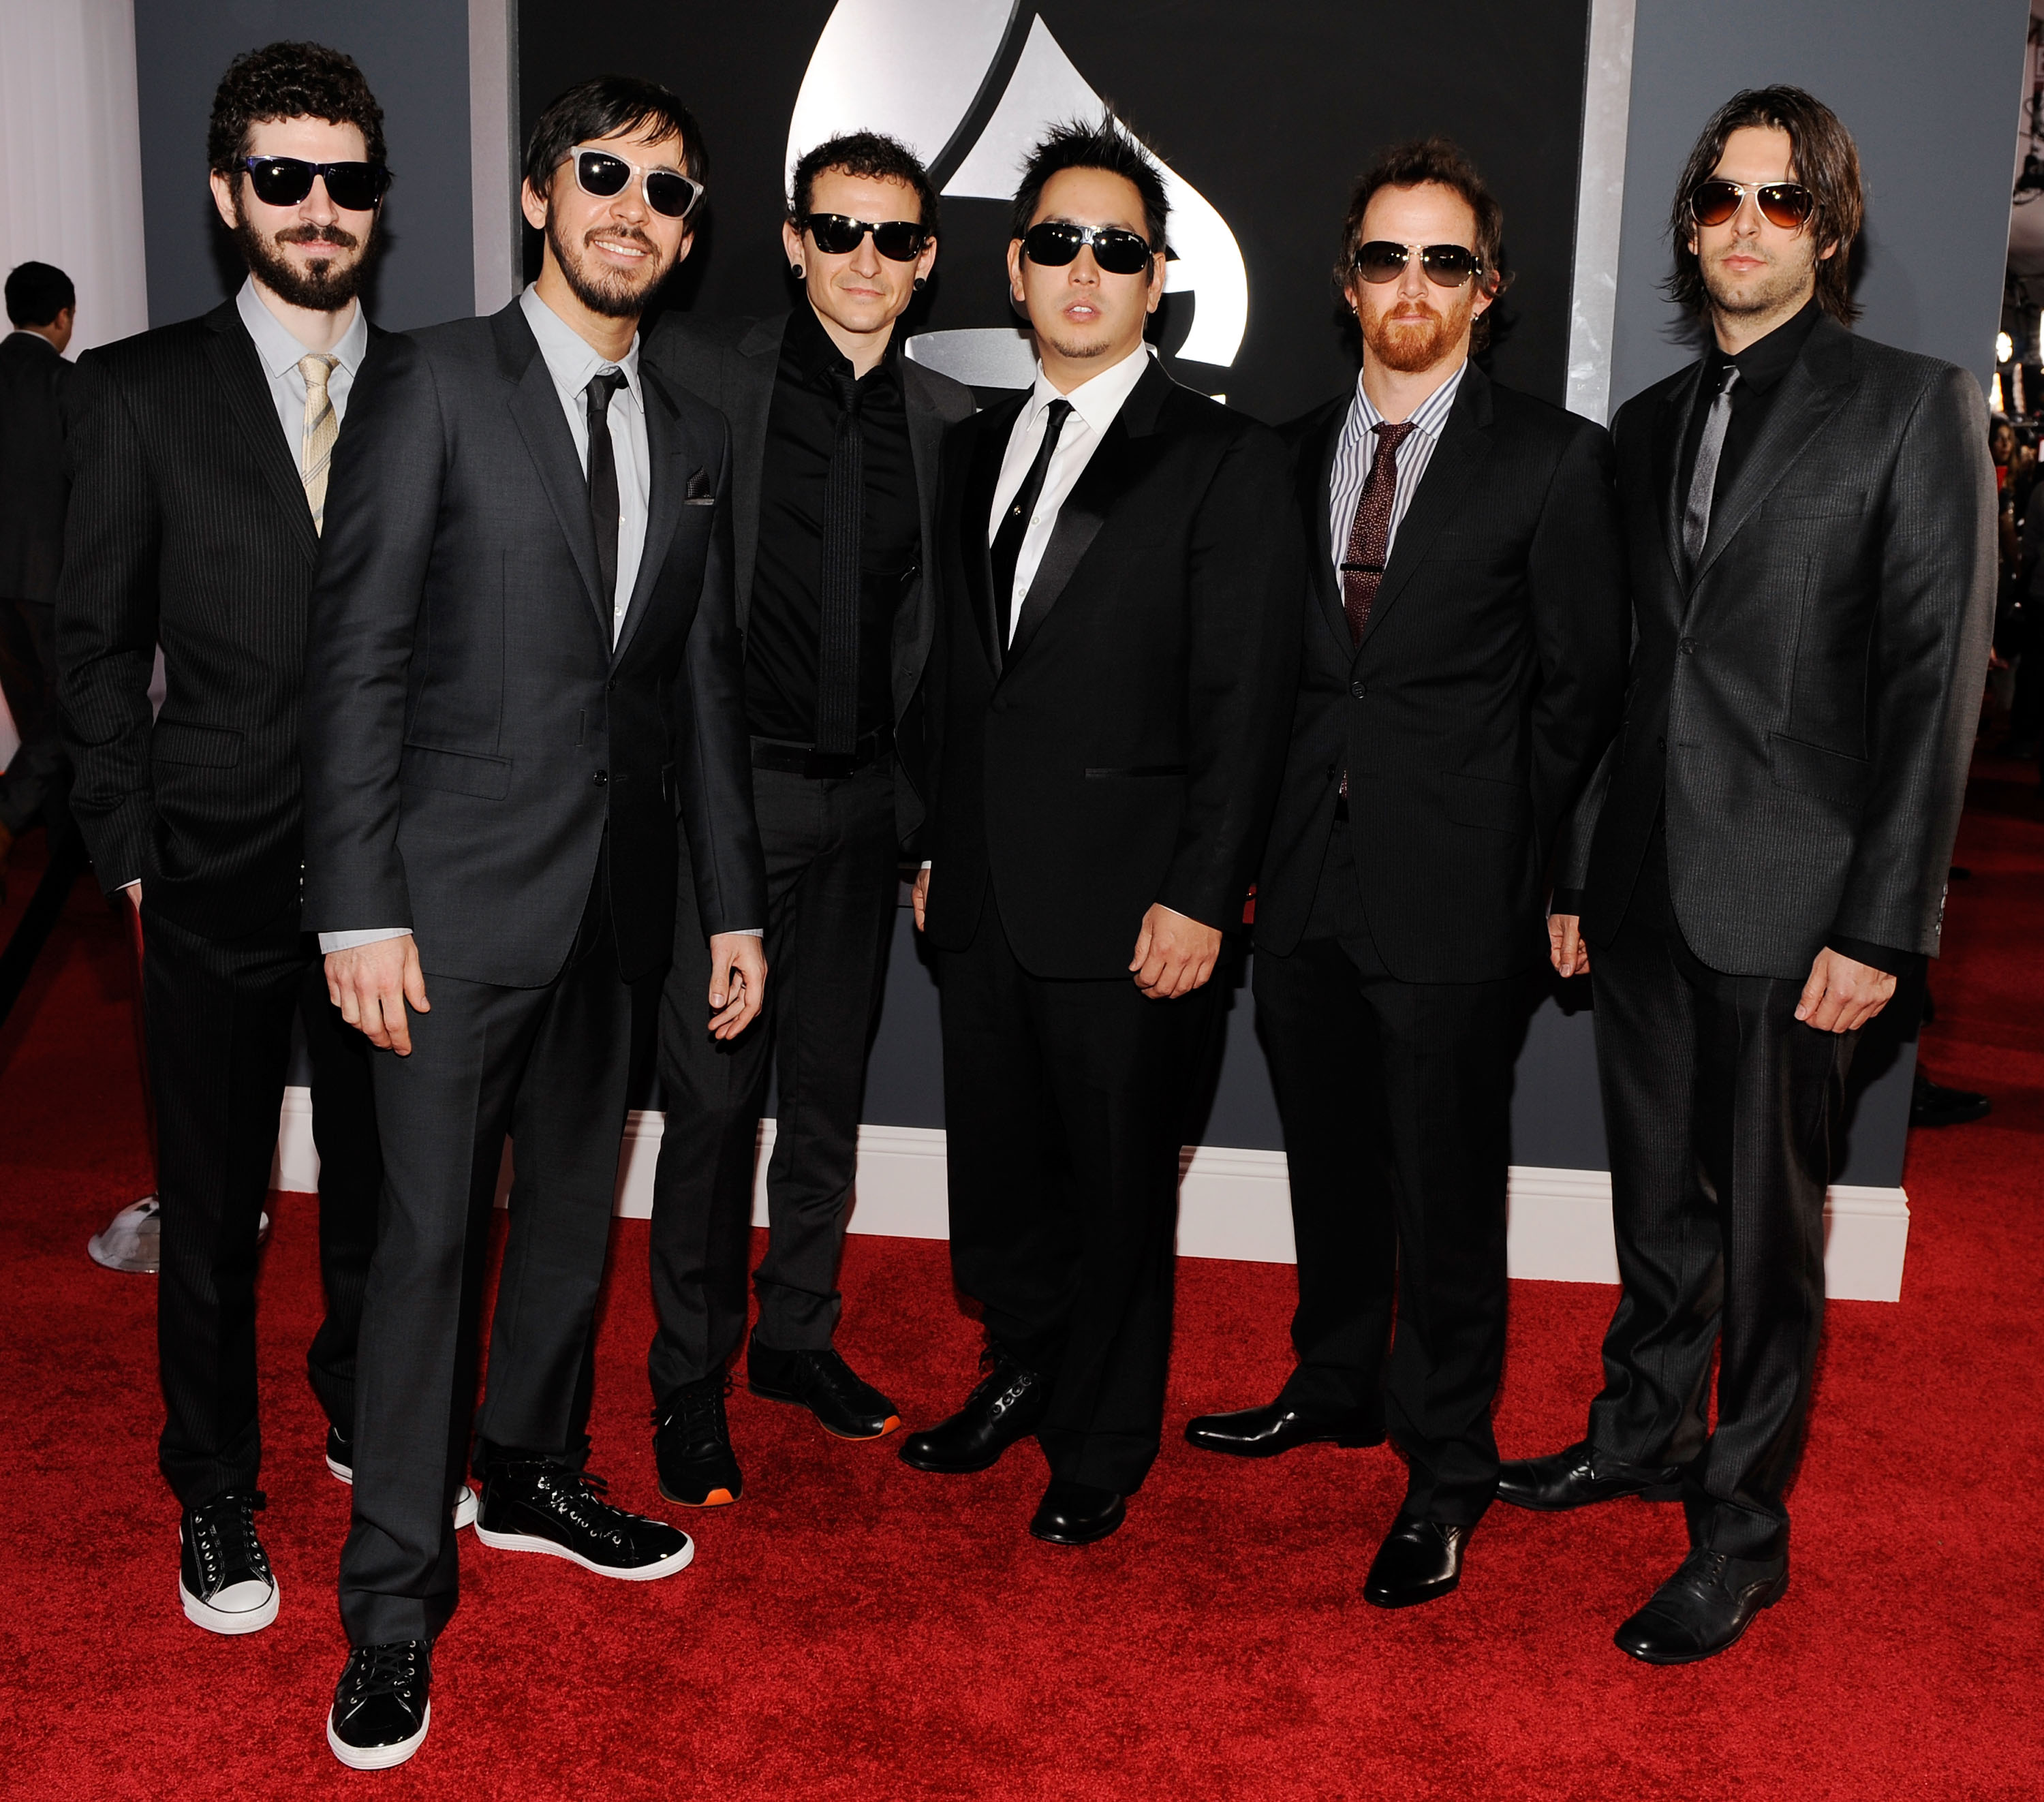 Linkin Park Lead Music For Relief Project To Benefit Haiti